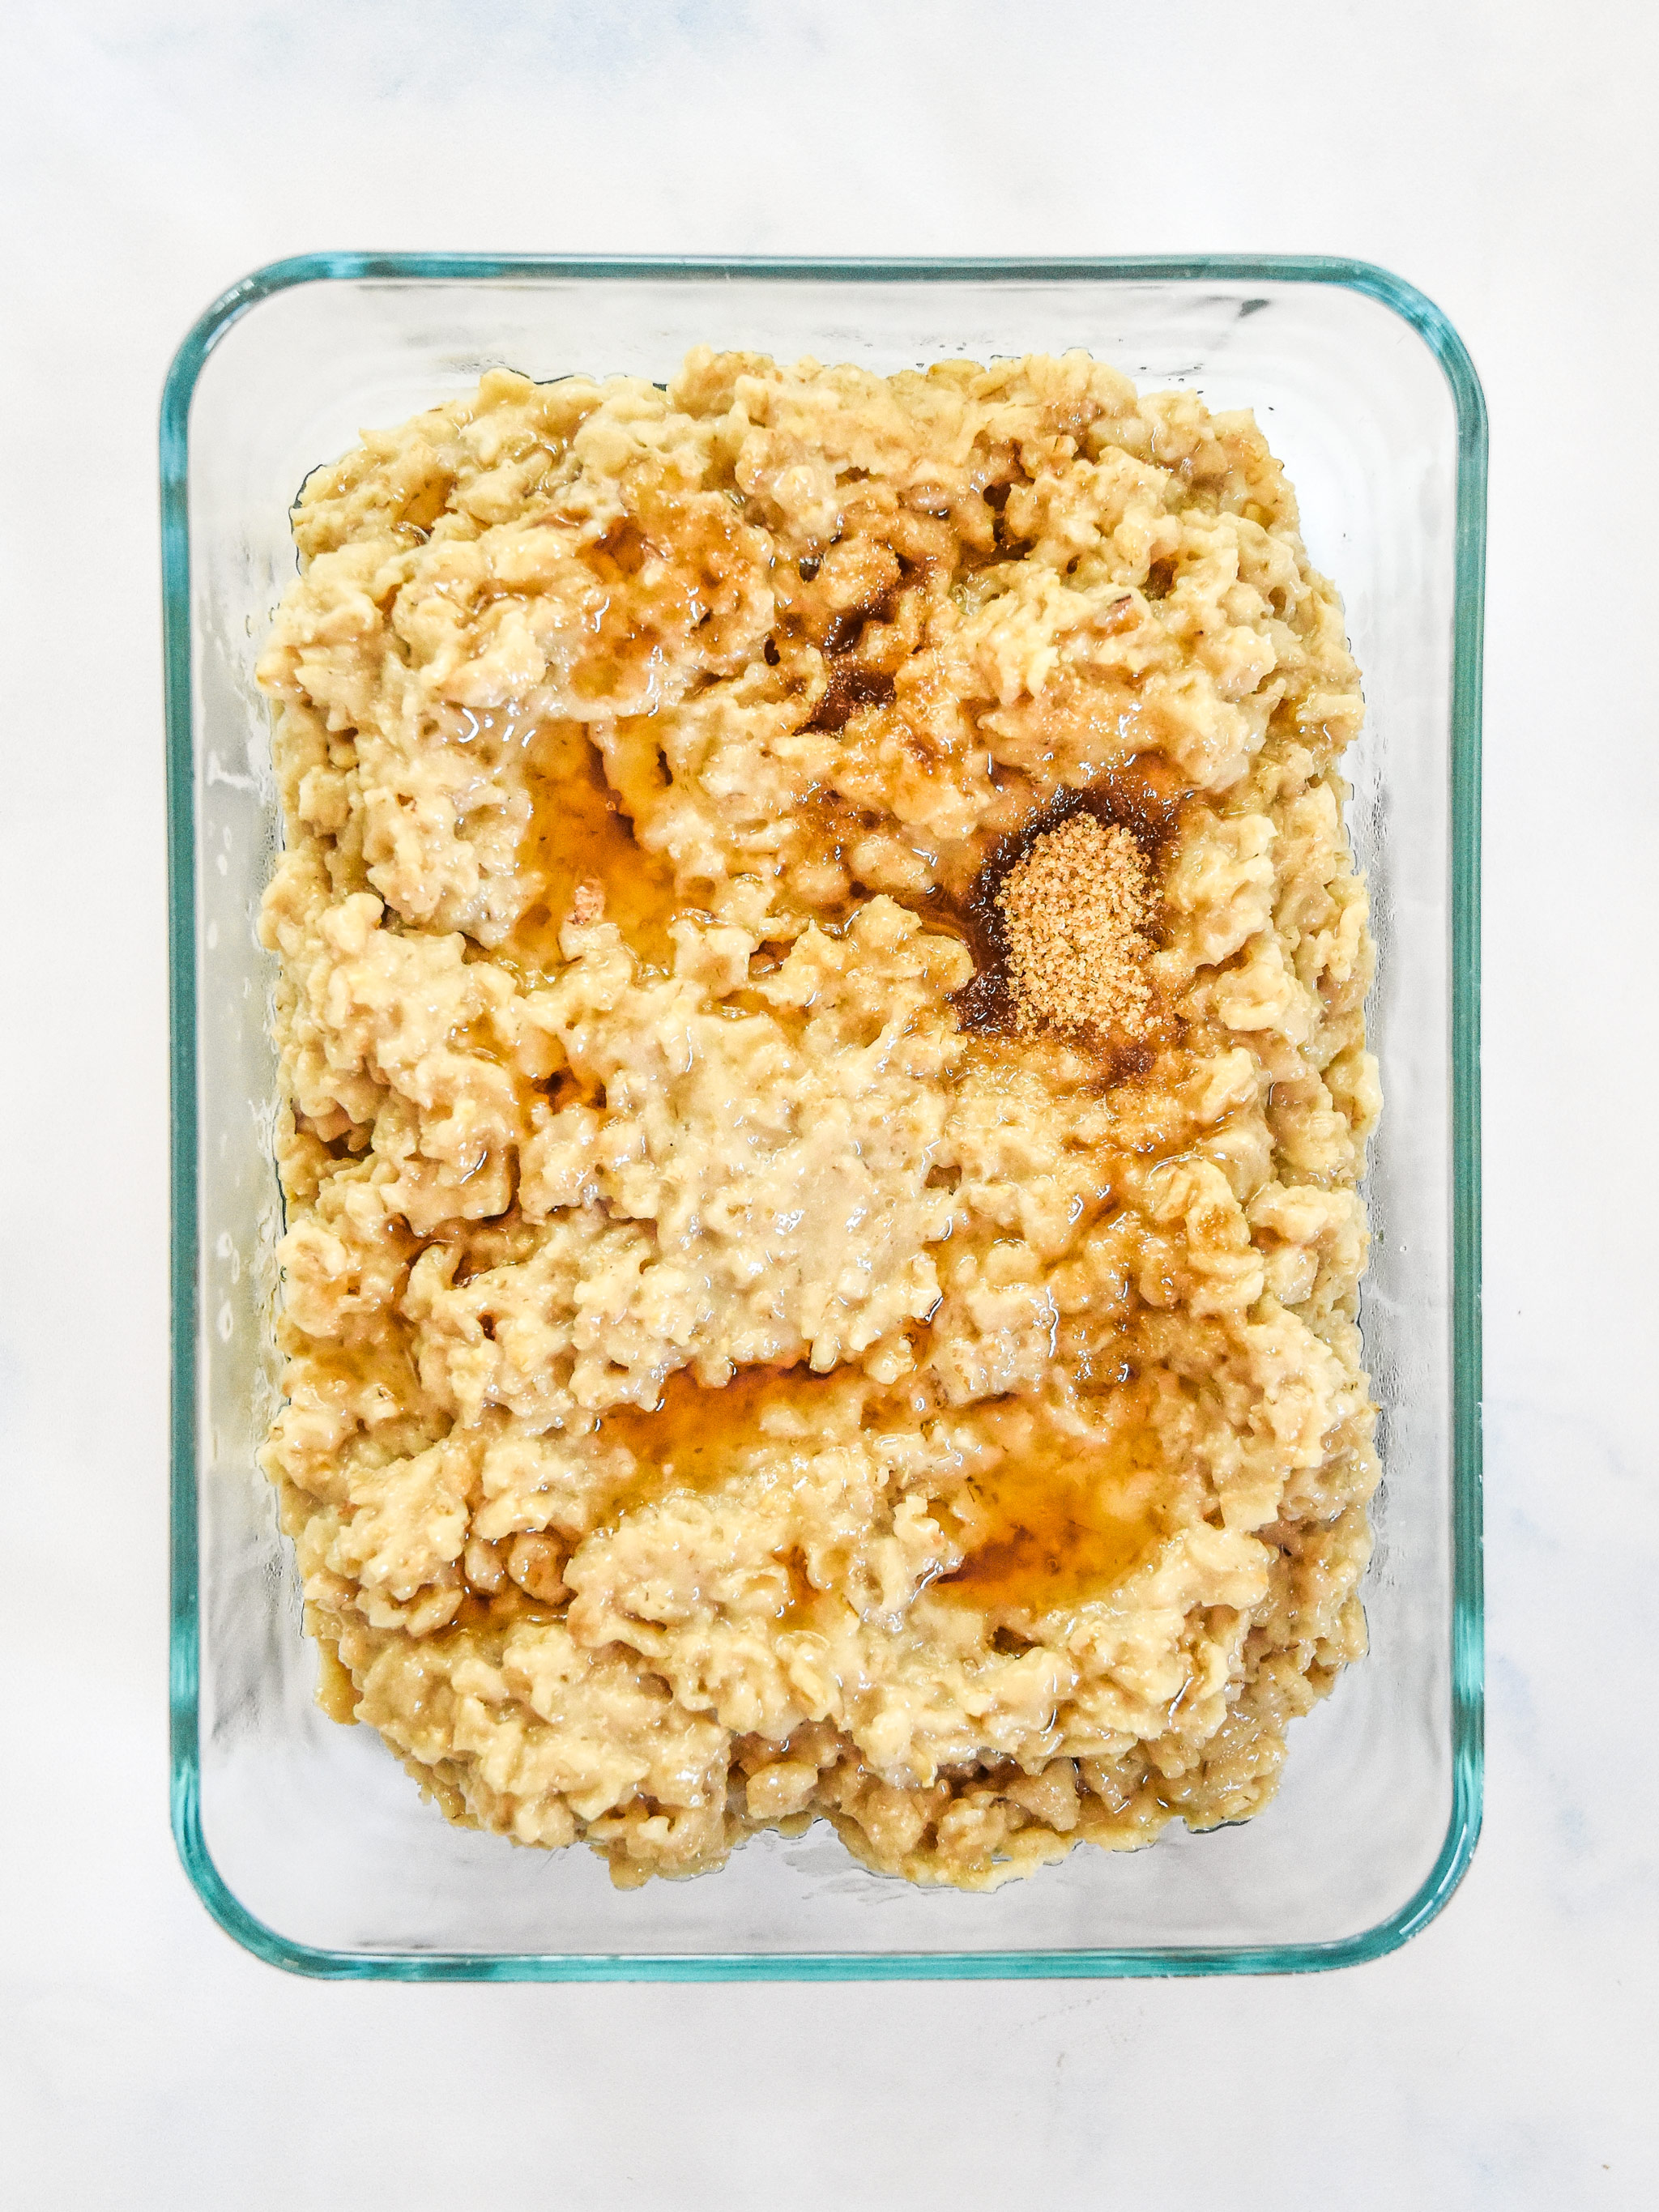 instant pot maple brown sugar oatmeal in a meal prep container